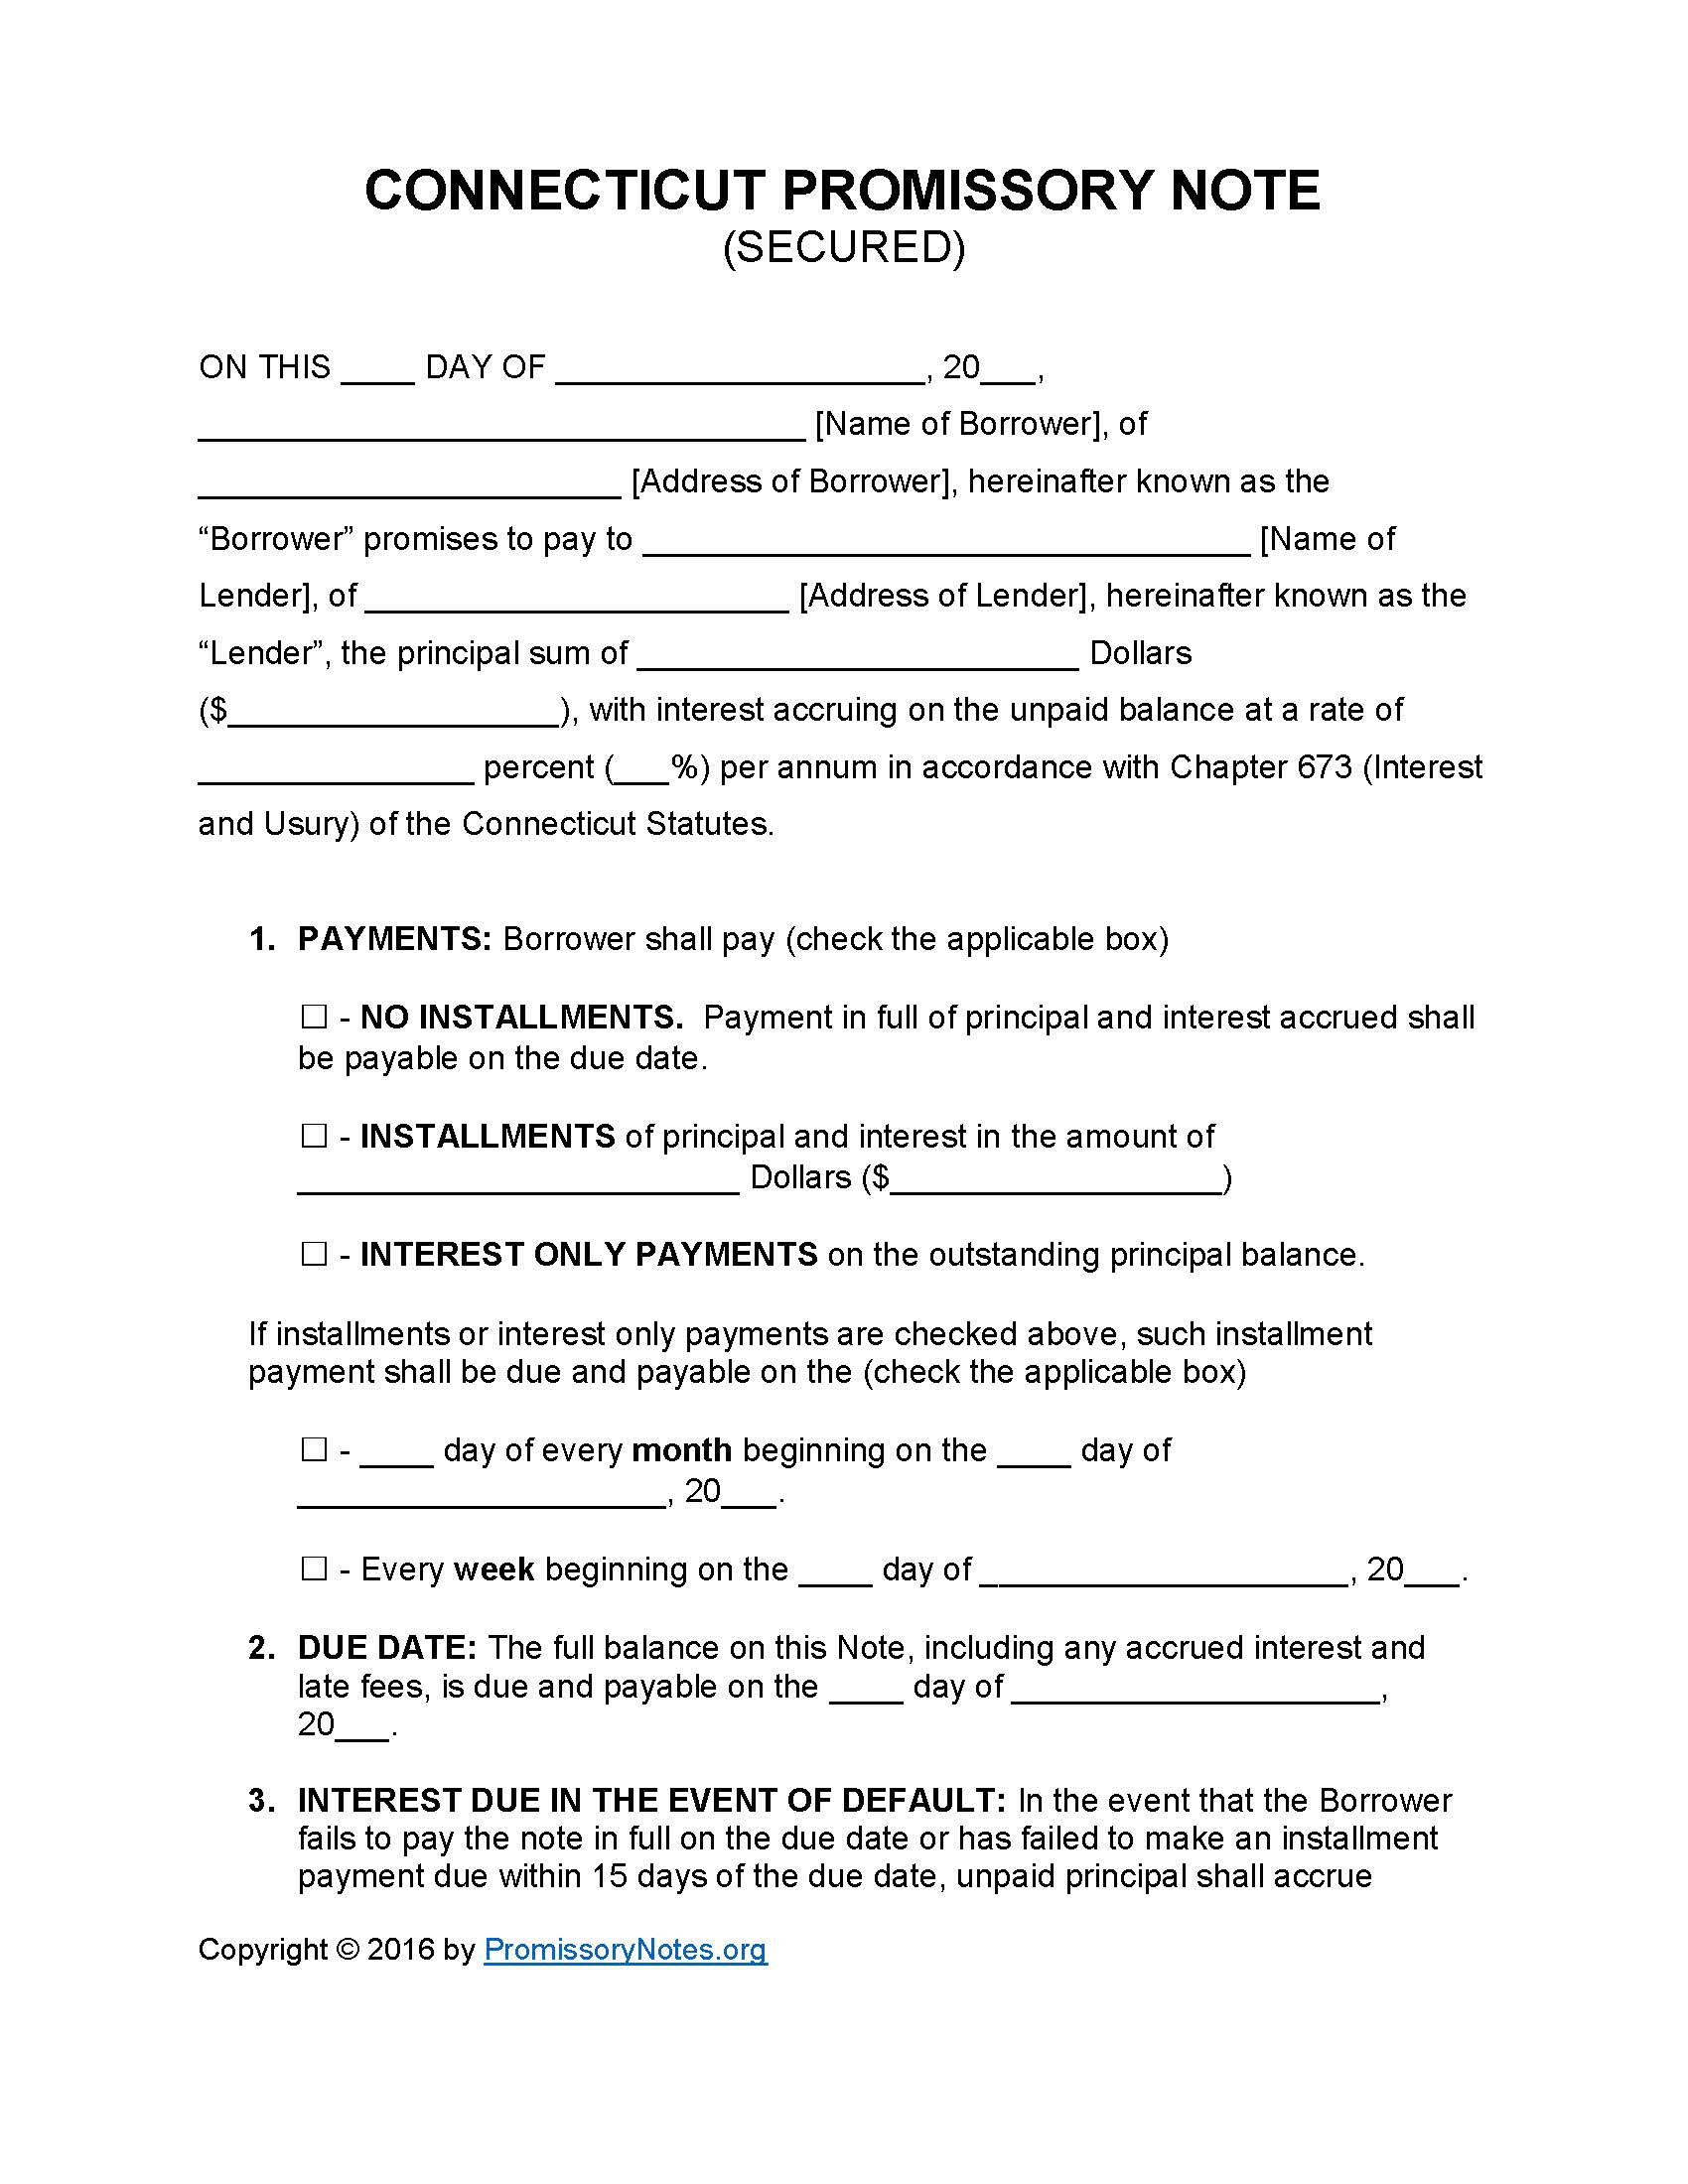 connecticut-secured-promissory-note-form